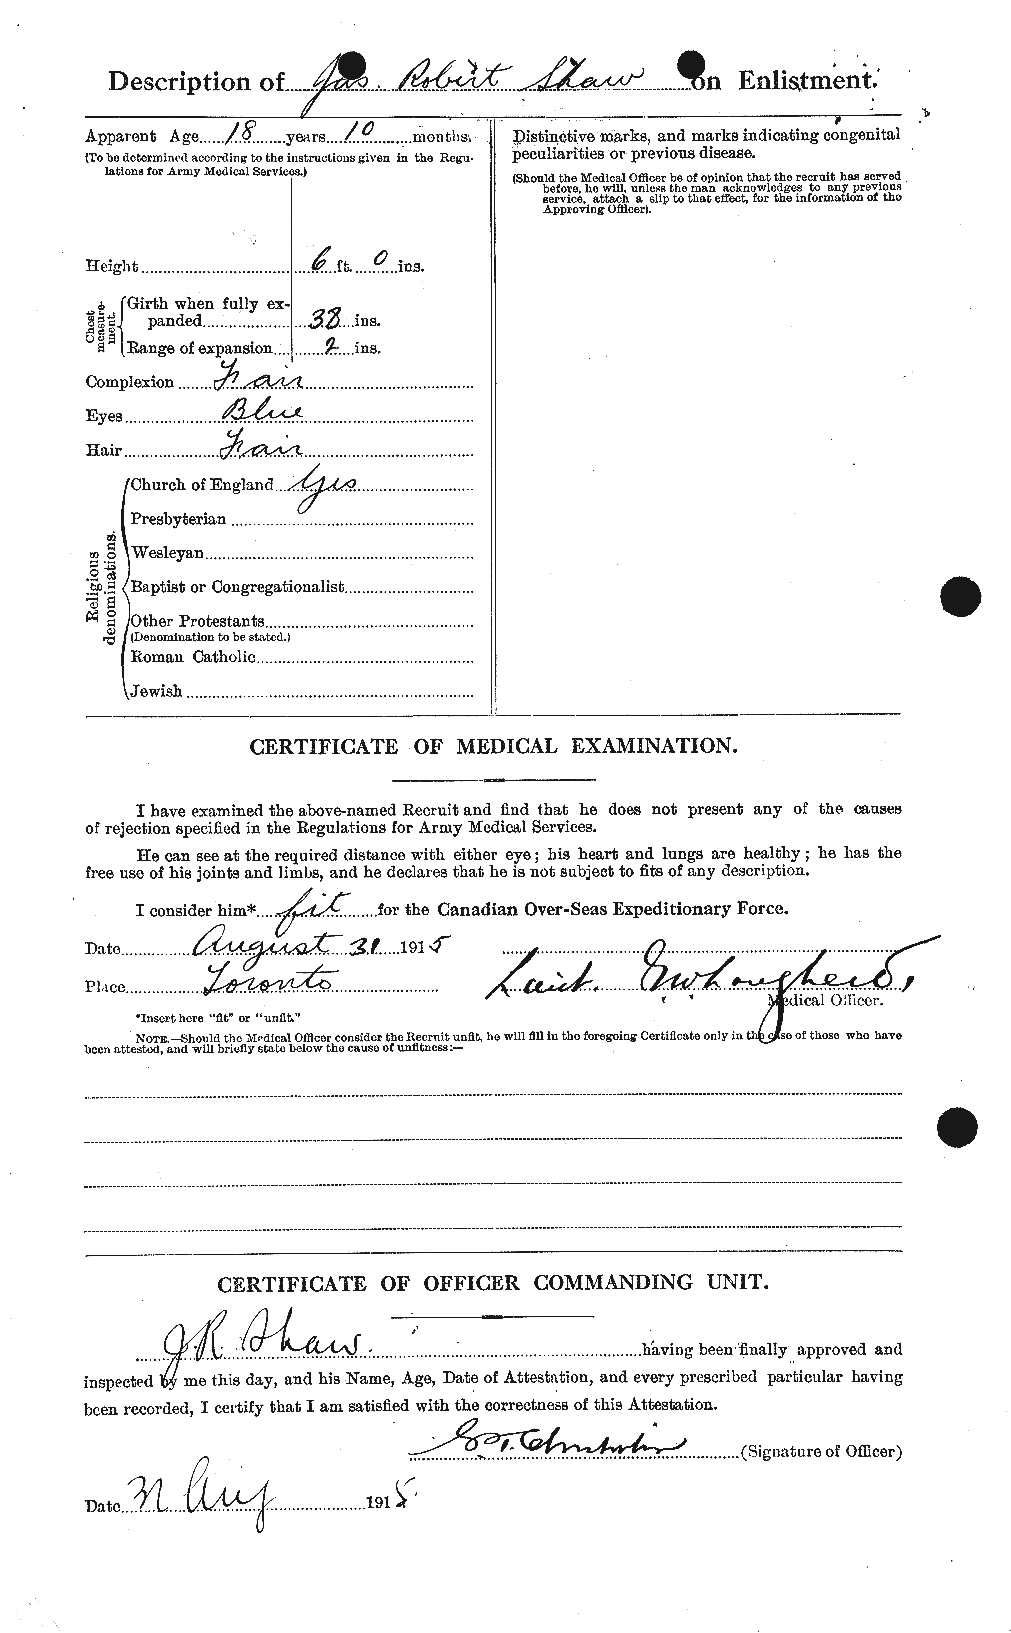 Personnel Records of the First World War - CEF 091172b